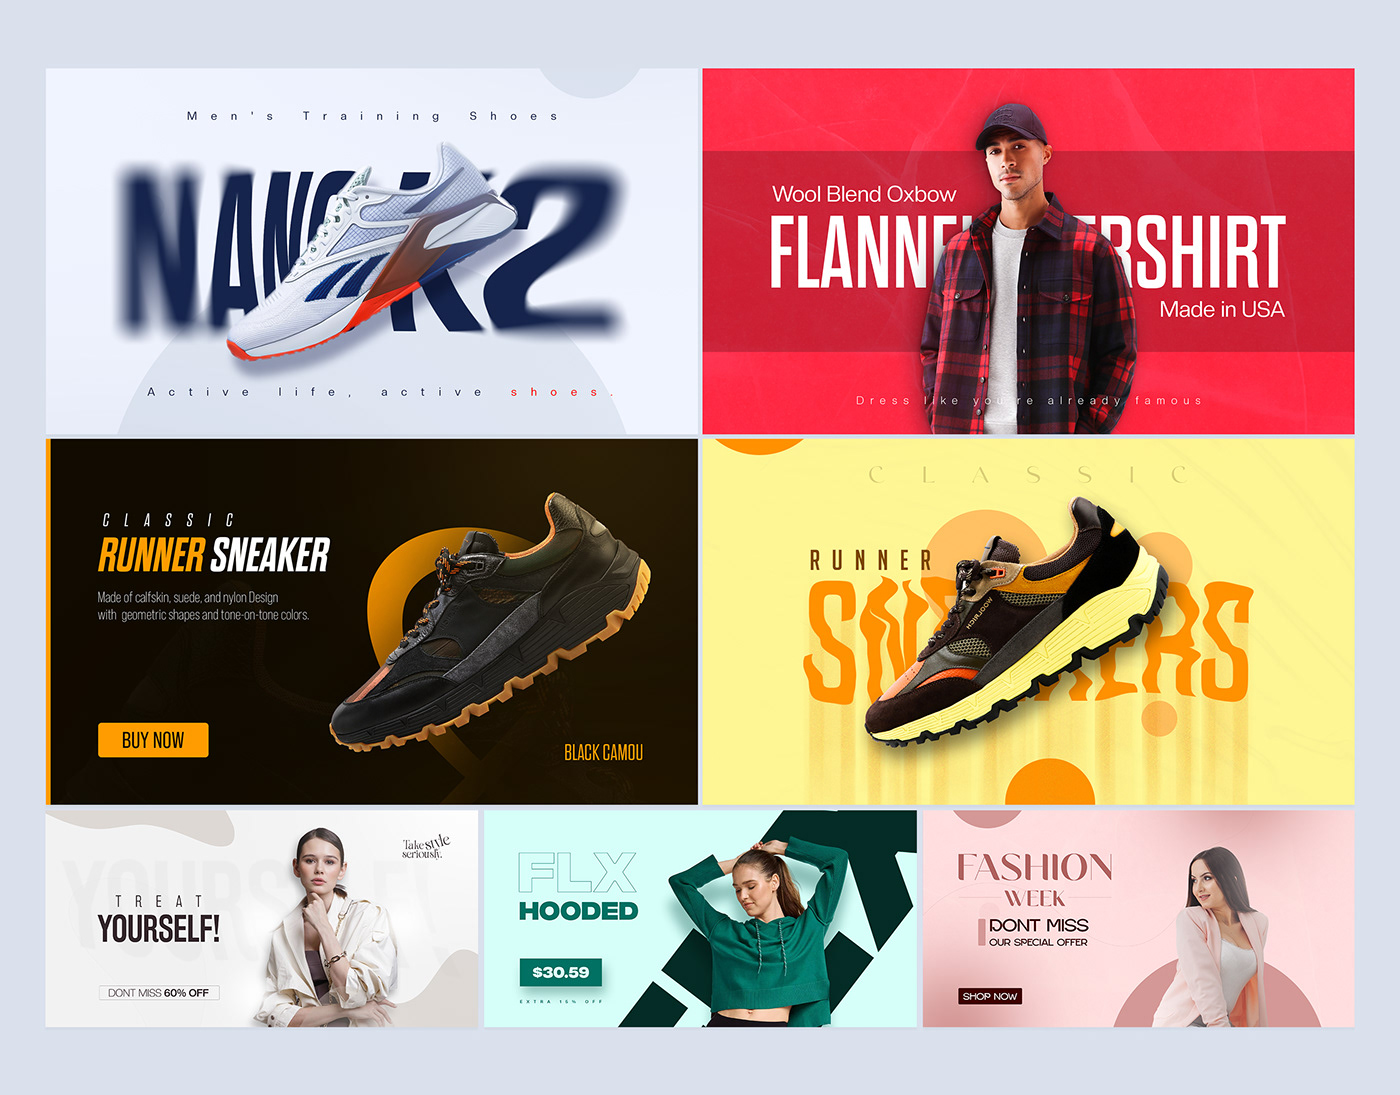 web banner
shopify banner
graphic design
shoes banner
ads
Advertising
banner
banners
graphic design
